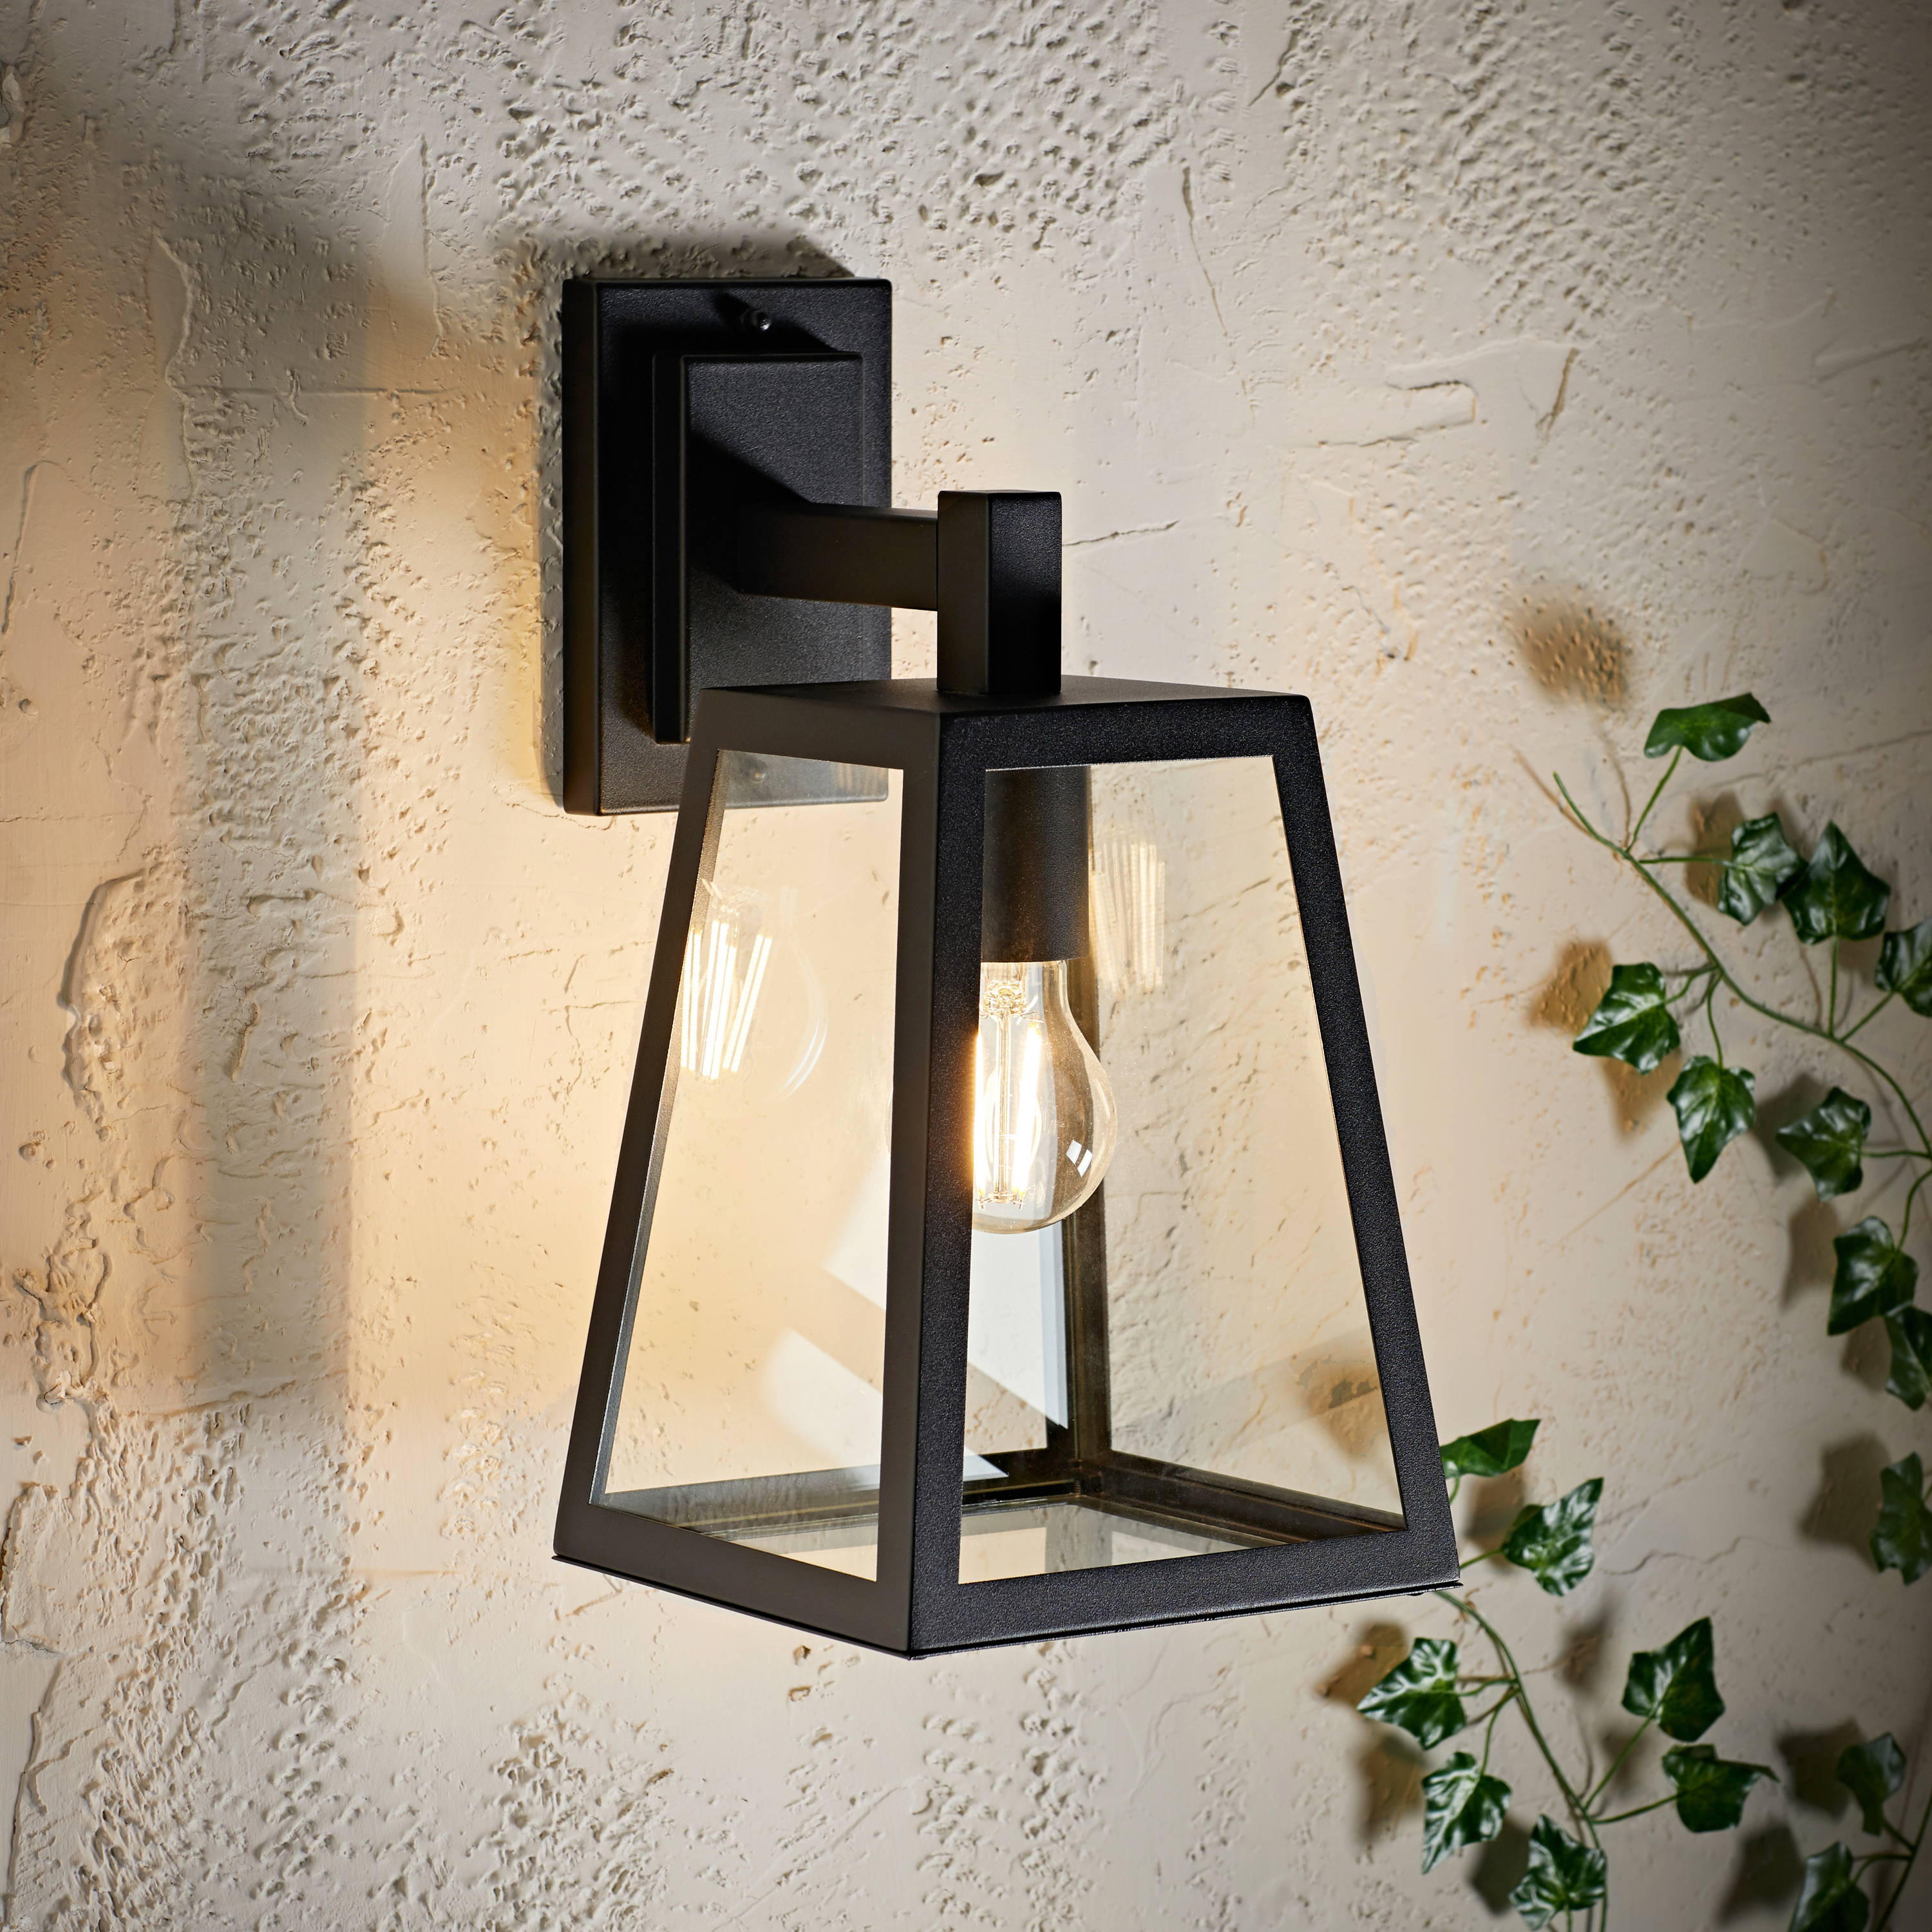 A black outdoor wall light on a textured wall